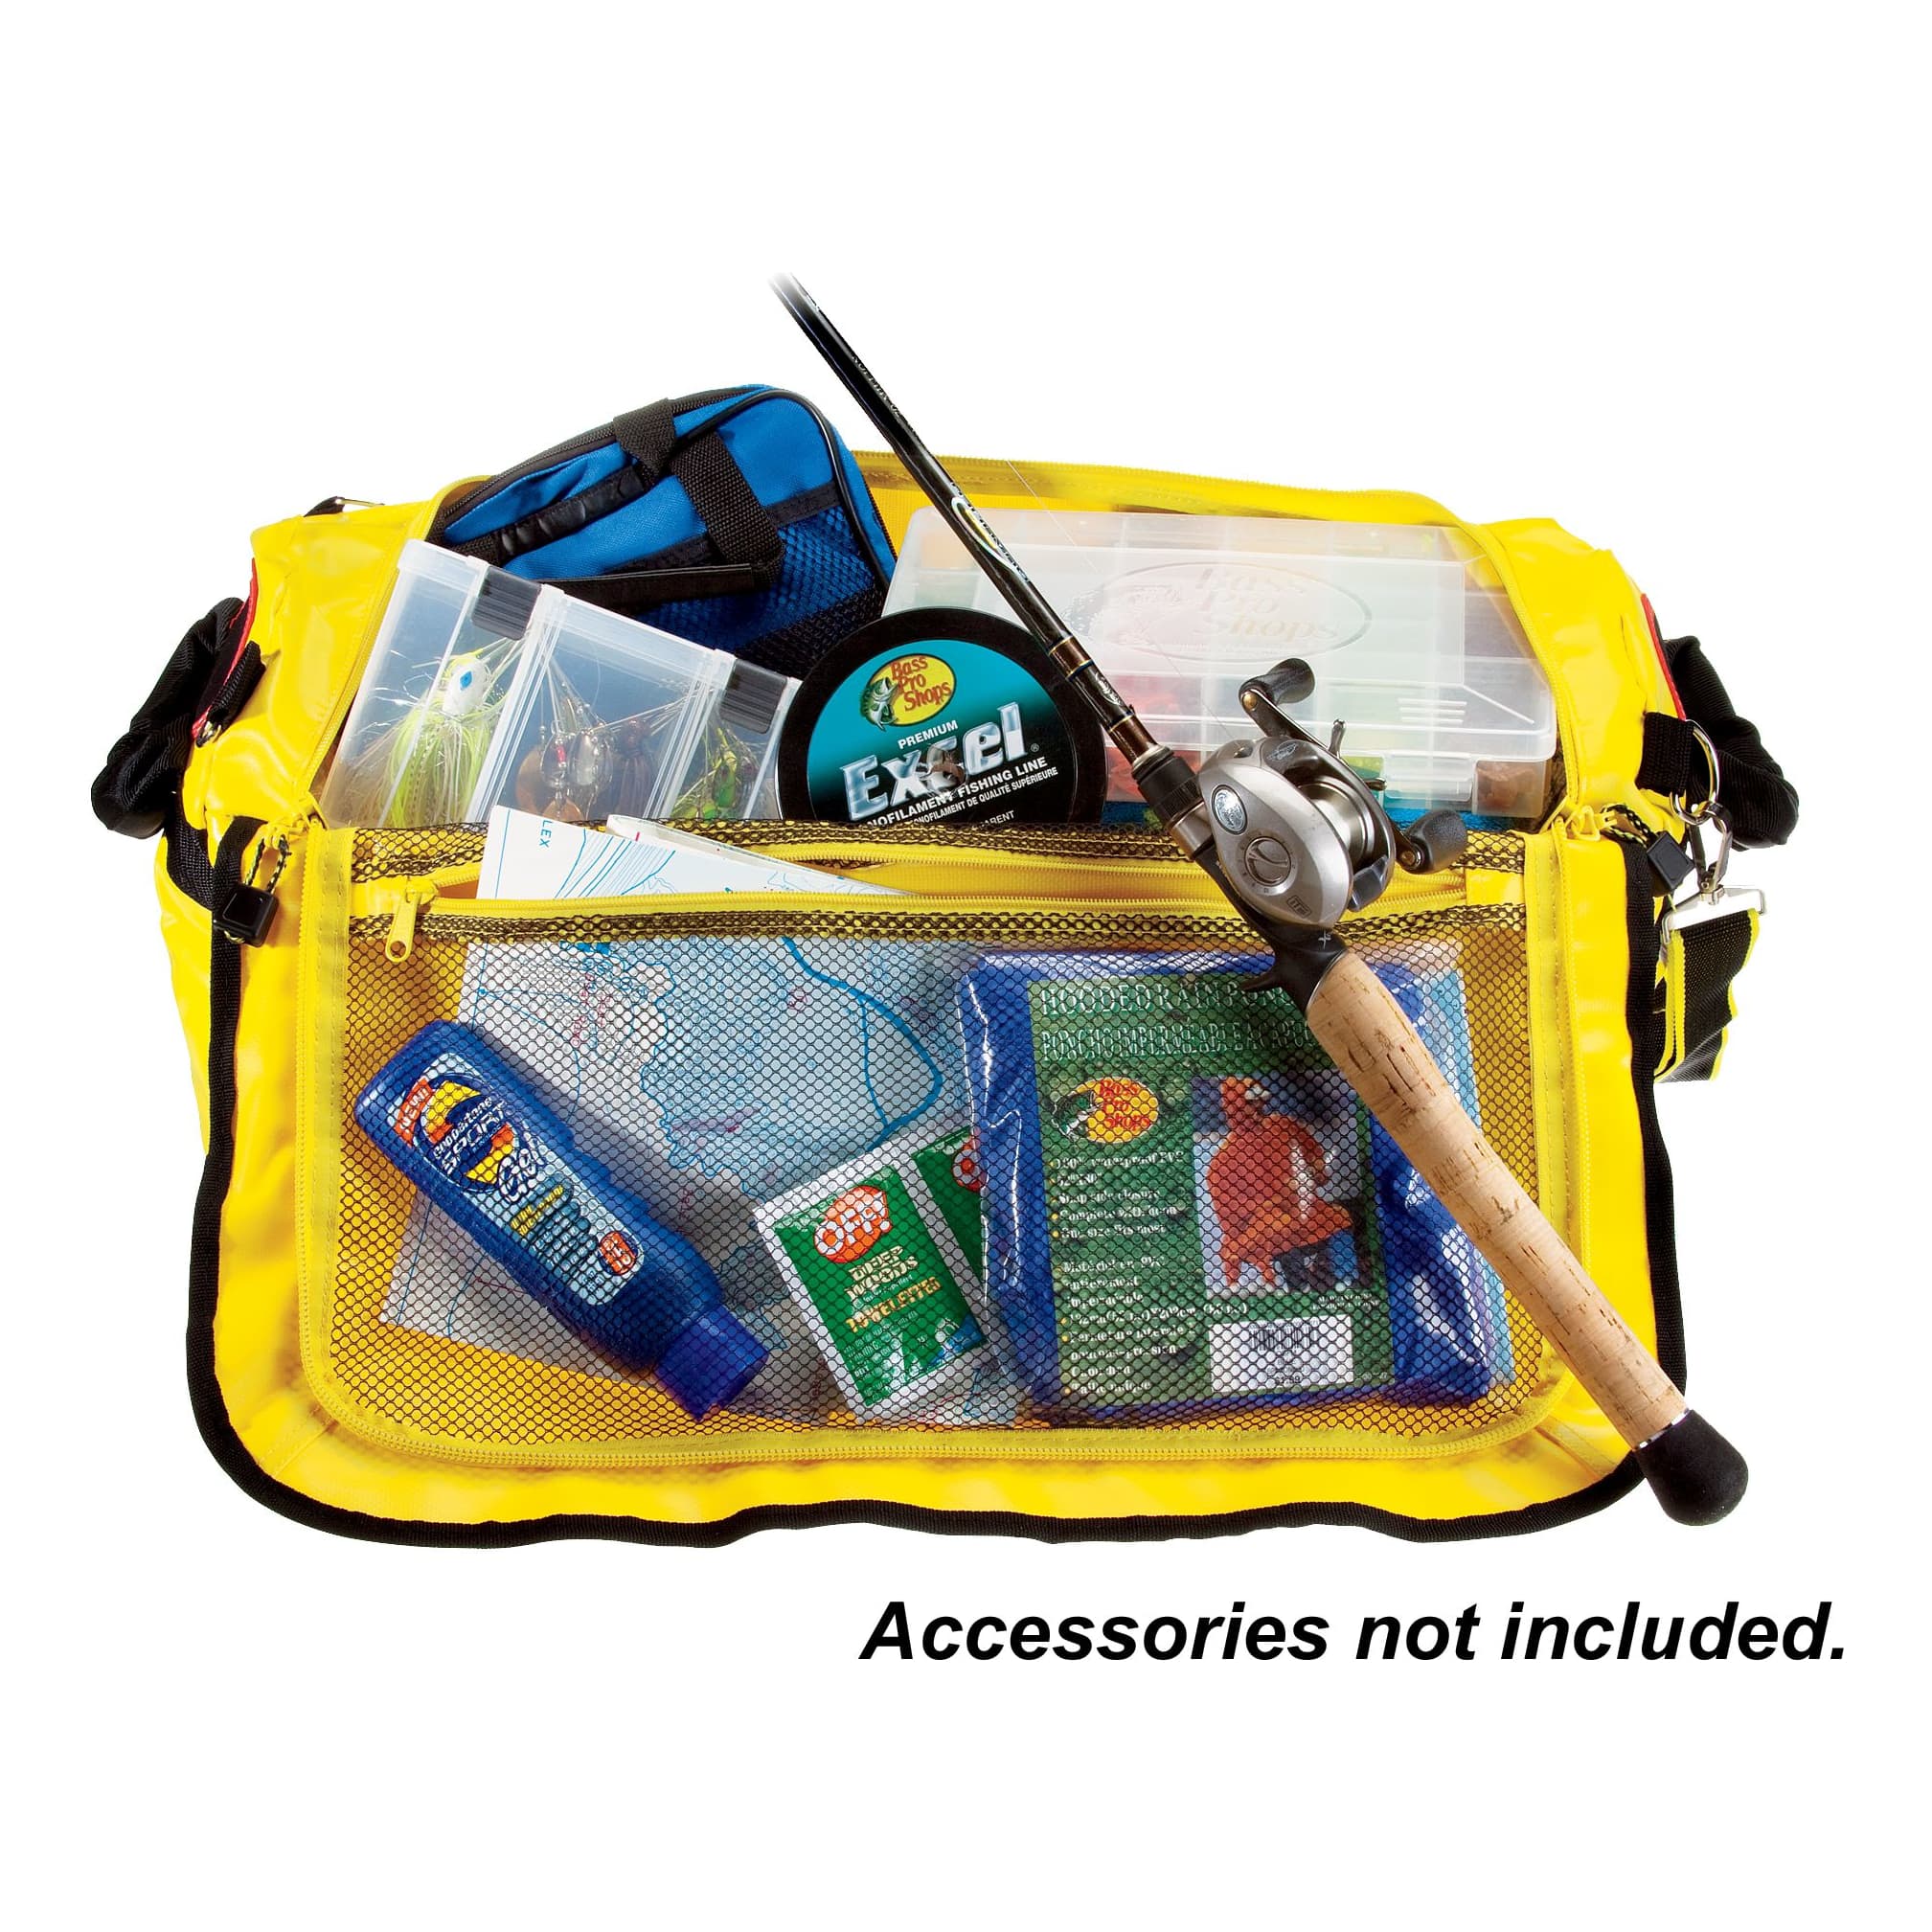 Bass Pro Shops® Extreme Series Tackle Bag